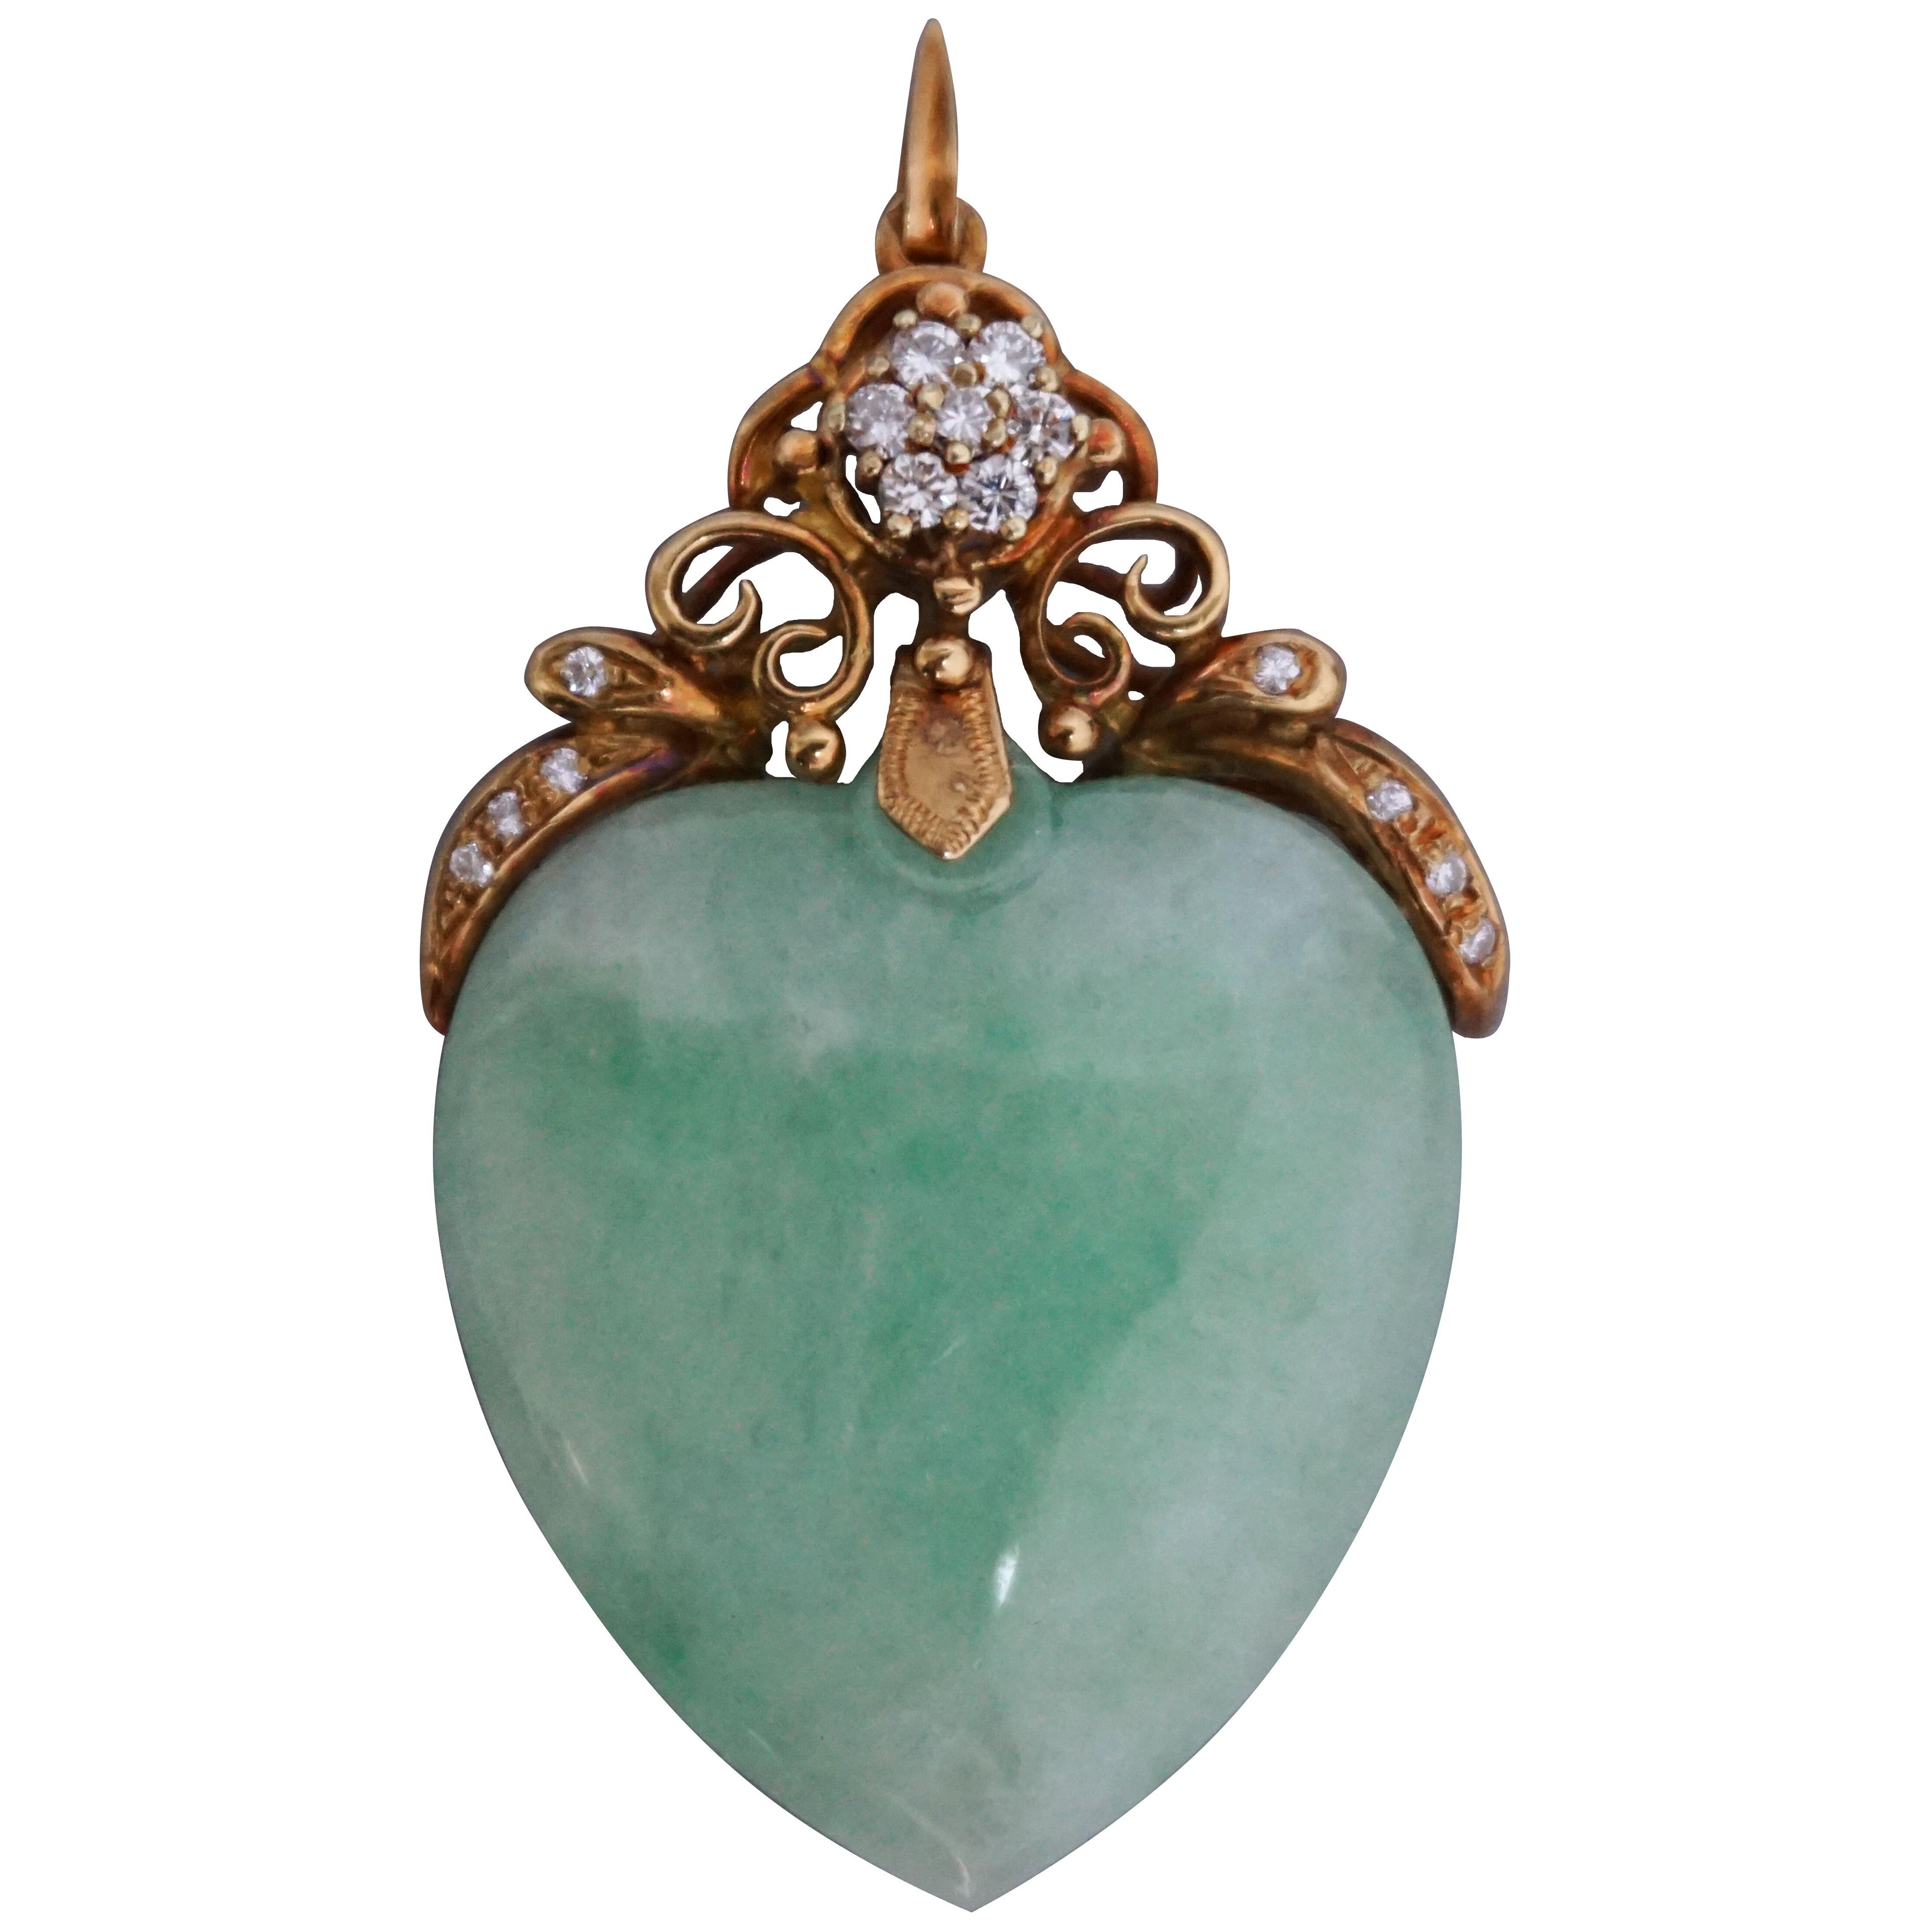 Large, 1900s Victorian Gold and Jade Heart Pendant with Brilliant Cut Diamonds